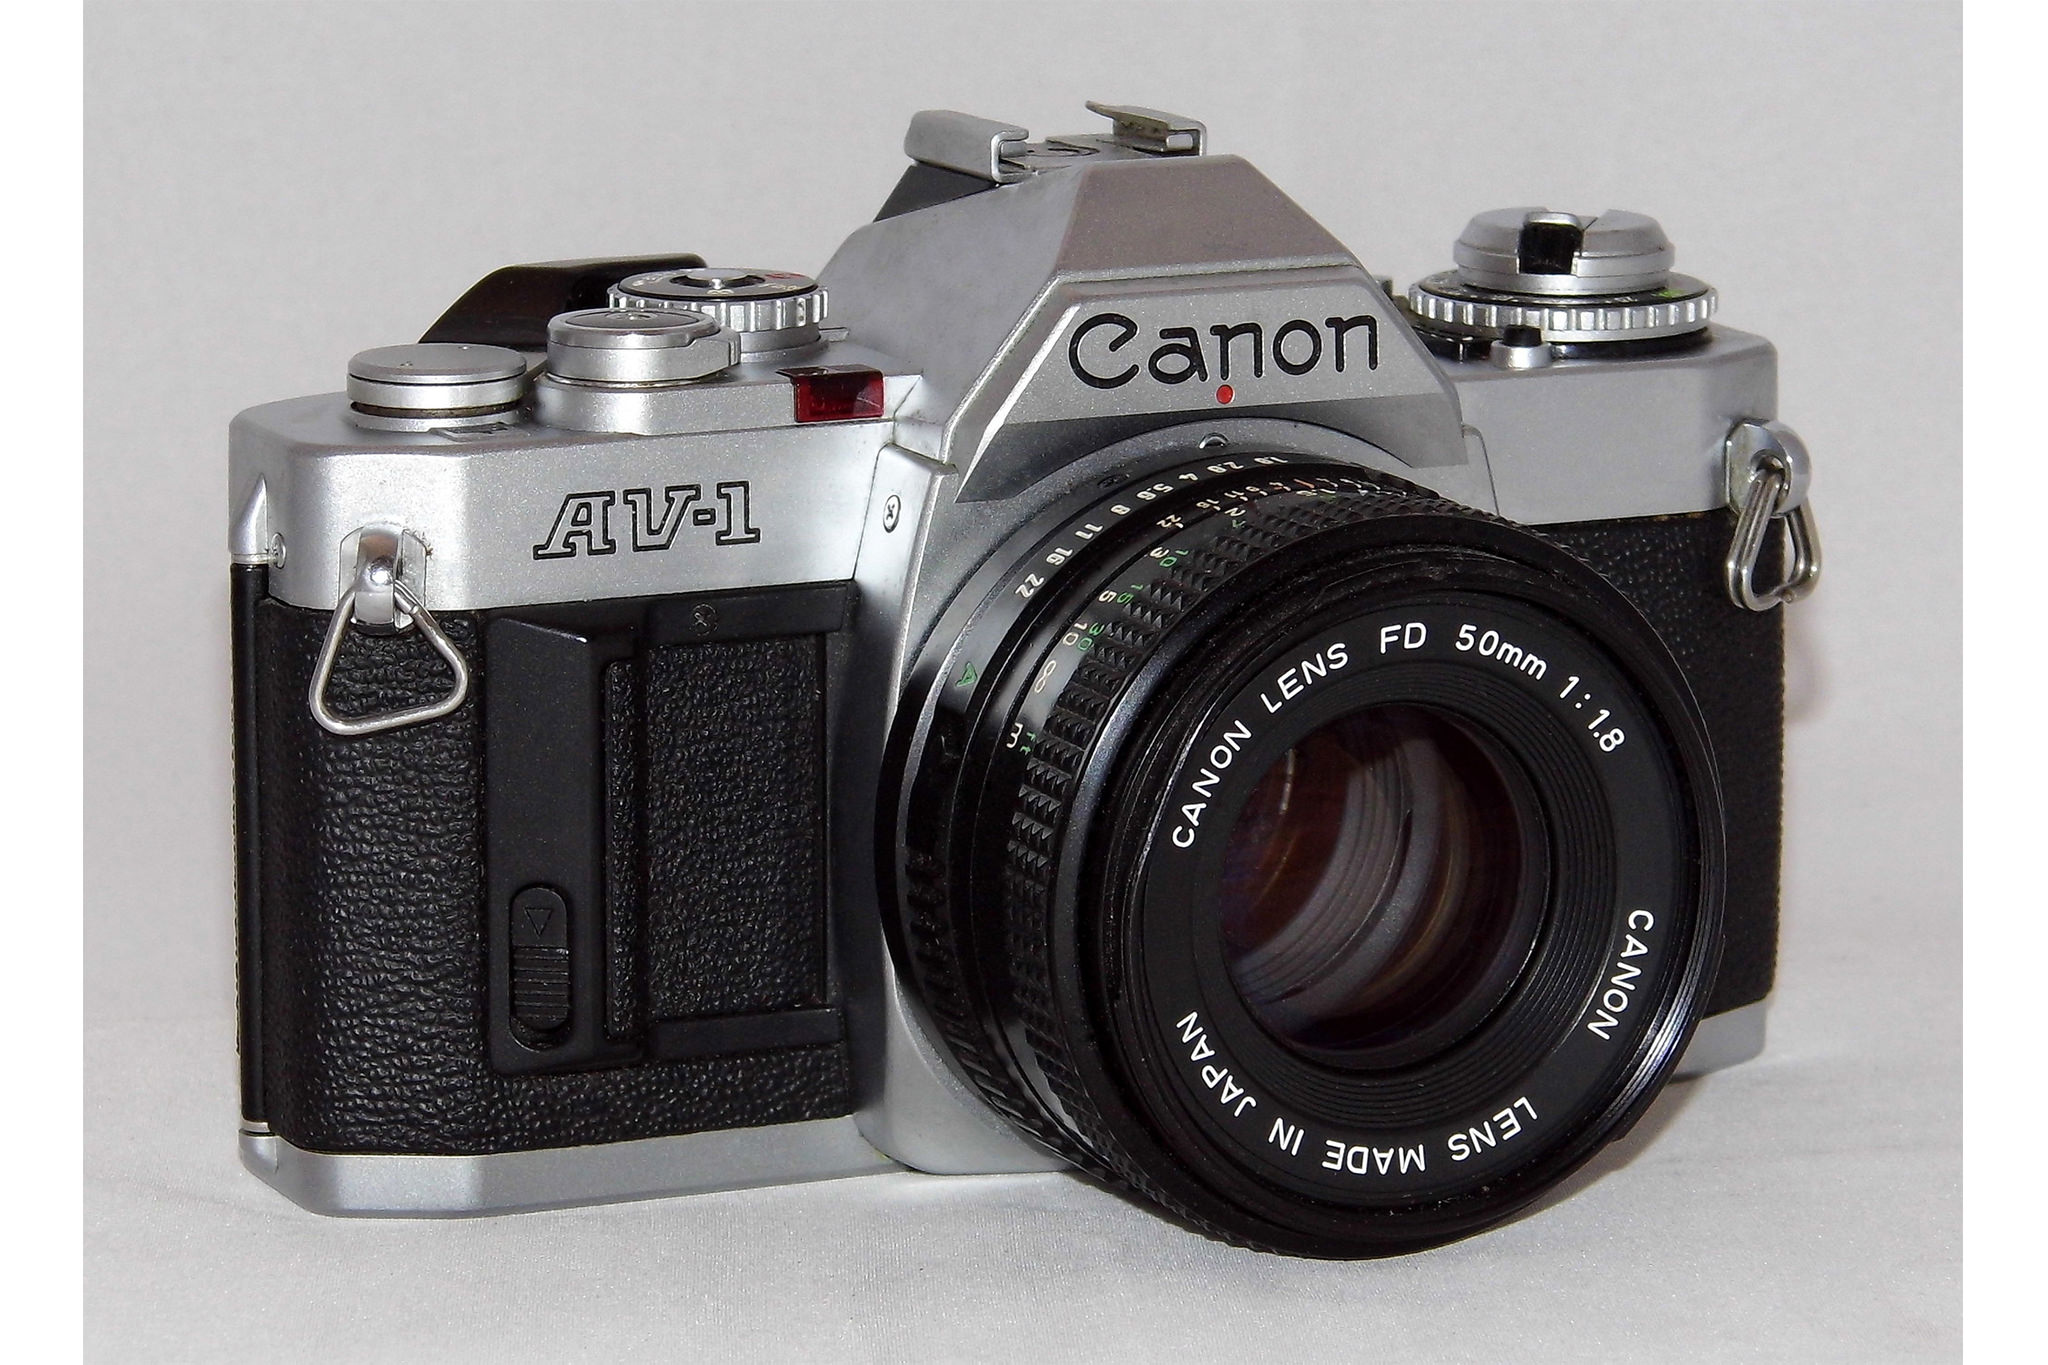 Canon AV-1 - Learn more about the 70s SLR camera for 35mm film